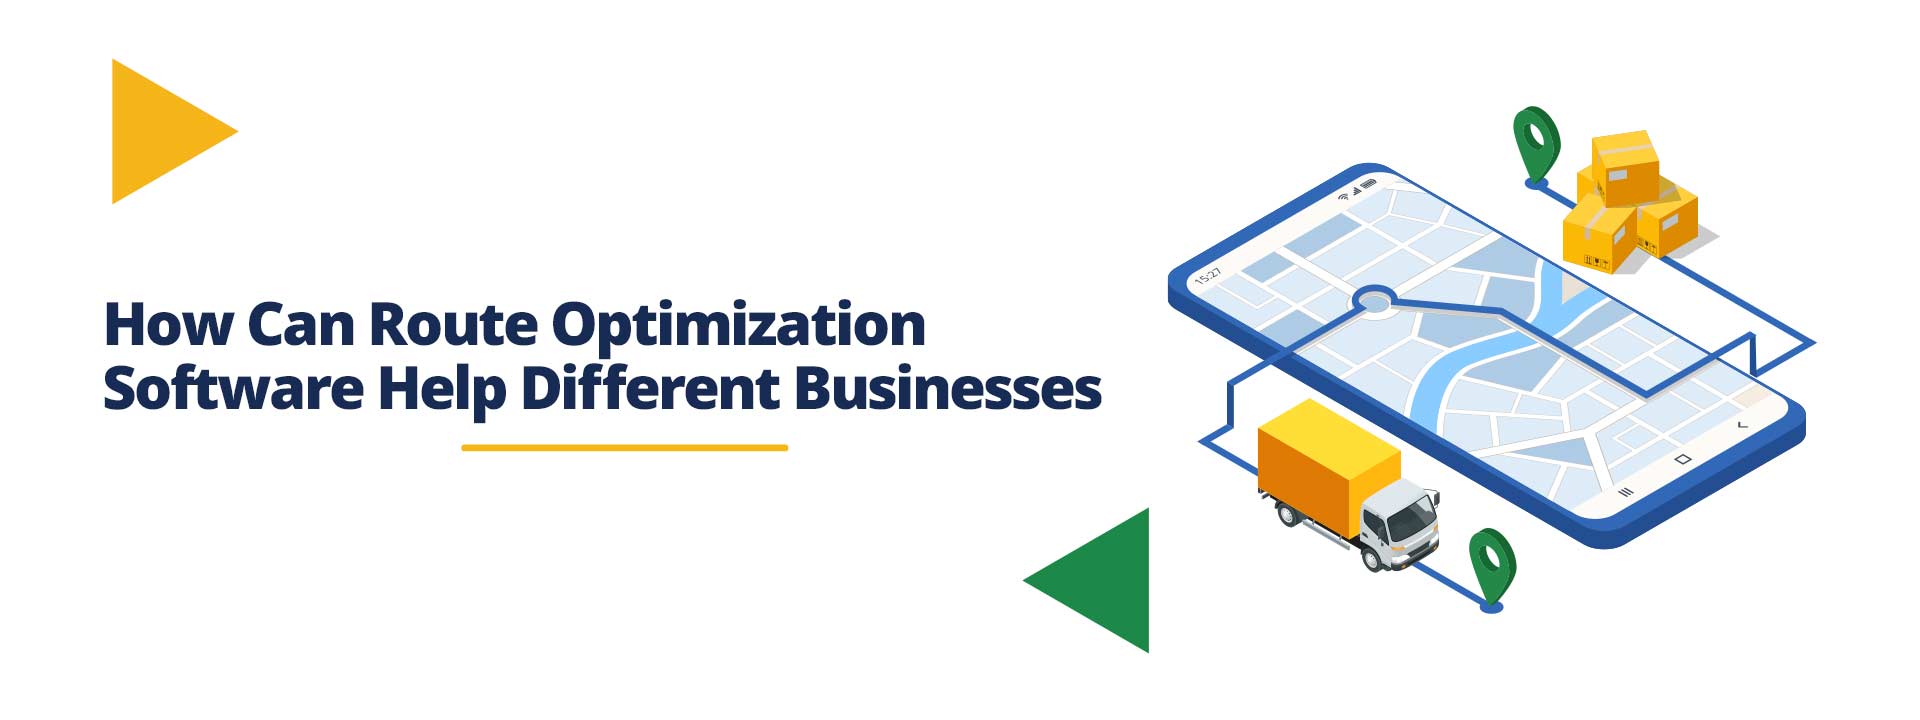 Route Optimization Software Help Different Businesses